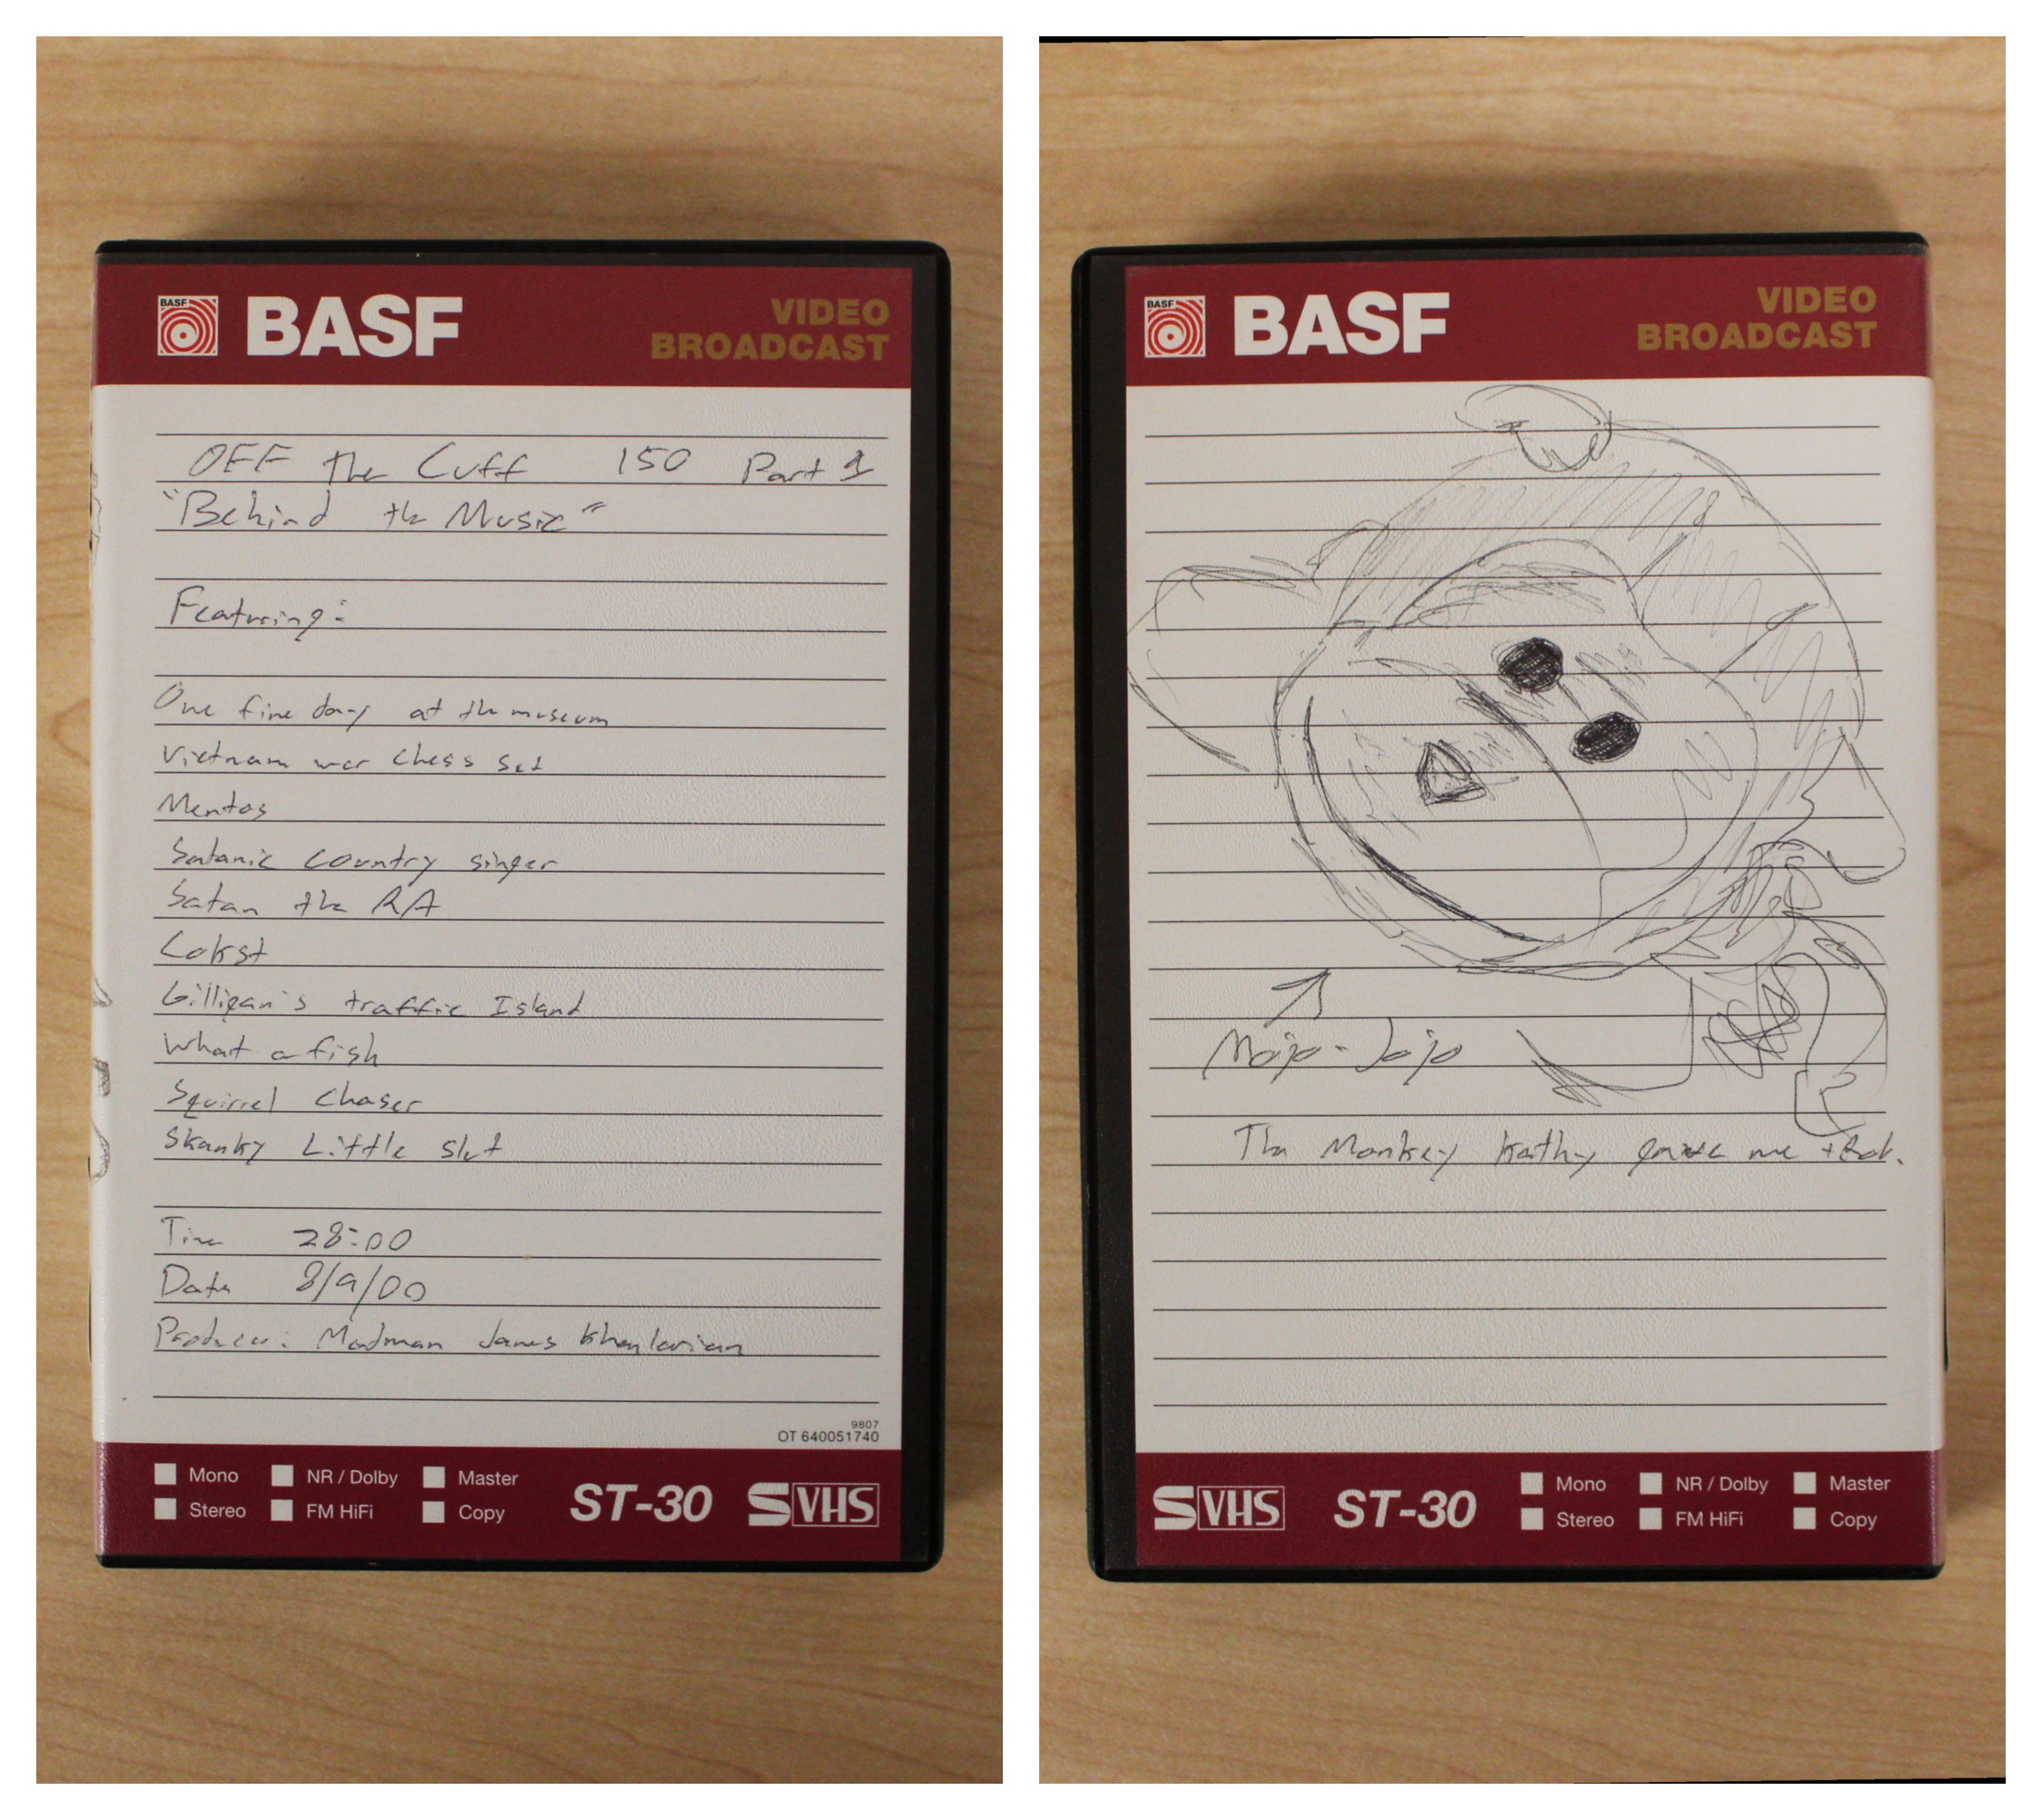 Photo collage of VHS case for "Off the Cuff #150: Behind the Music Part 1" Label has a drawing of a monkey on it. 